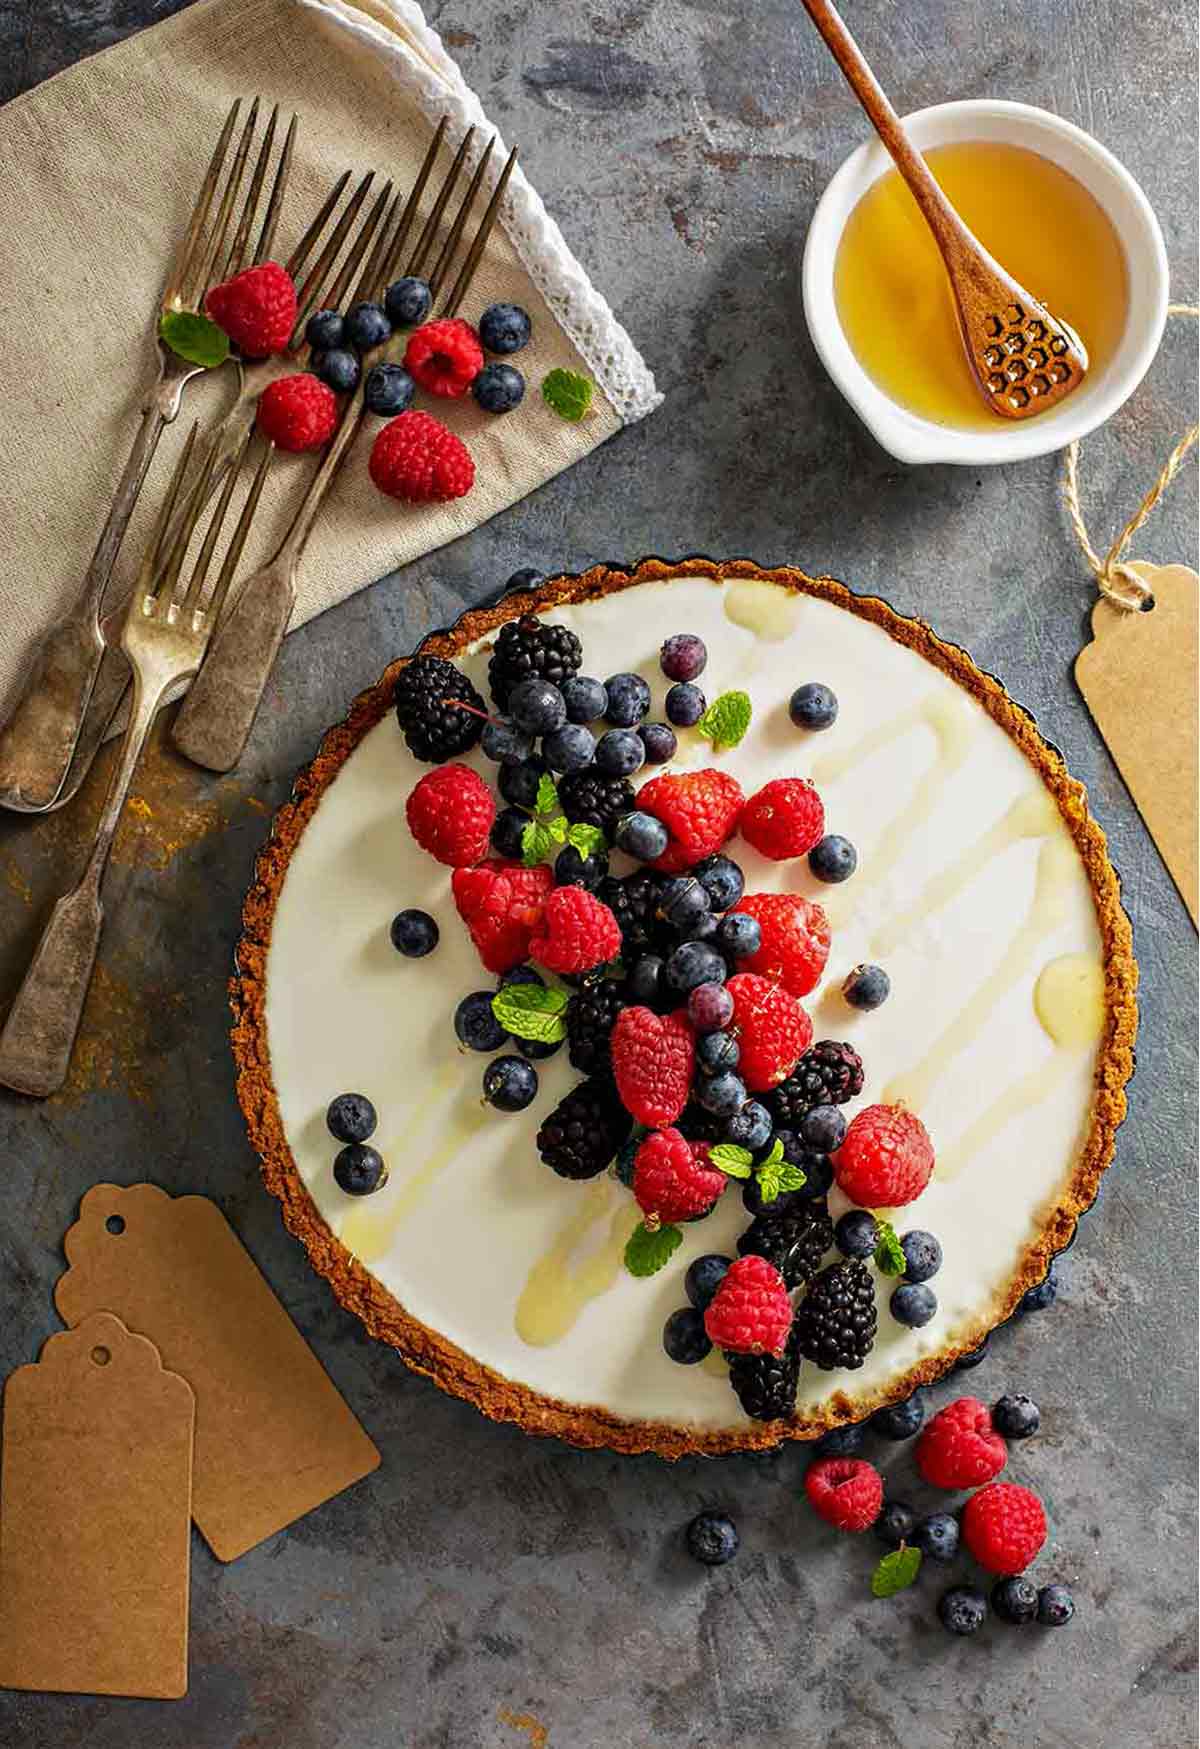 A red, white, and blue tart with a graham cracker crust, cream cheese filling, and raspberries, blueberries, and blackberry on top